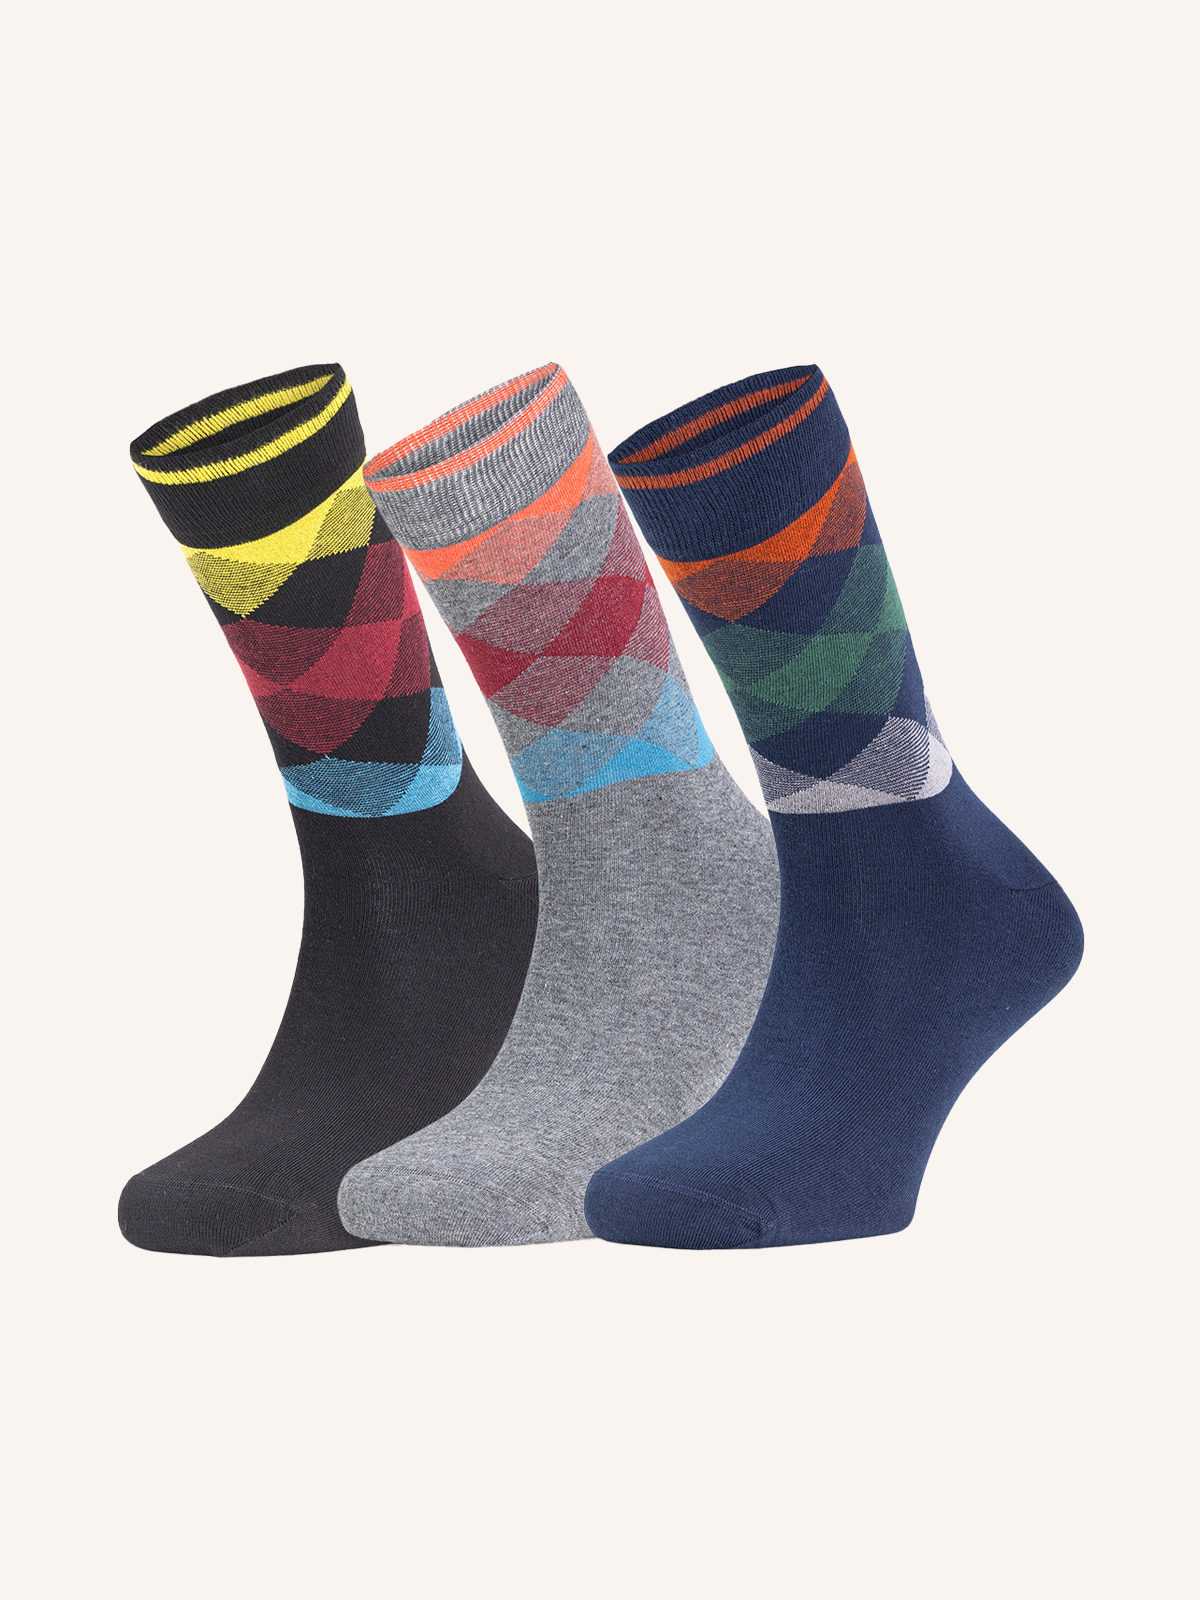 Short Combed Cotton Sock for Men | Fantasy | Pack of 3 pairs | Bruce C